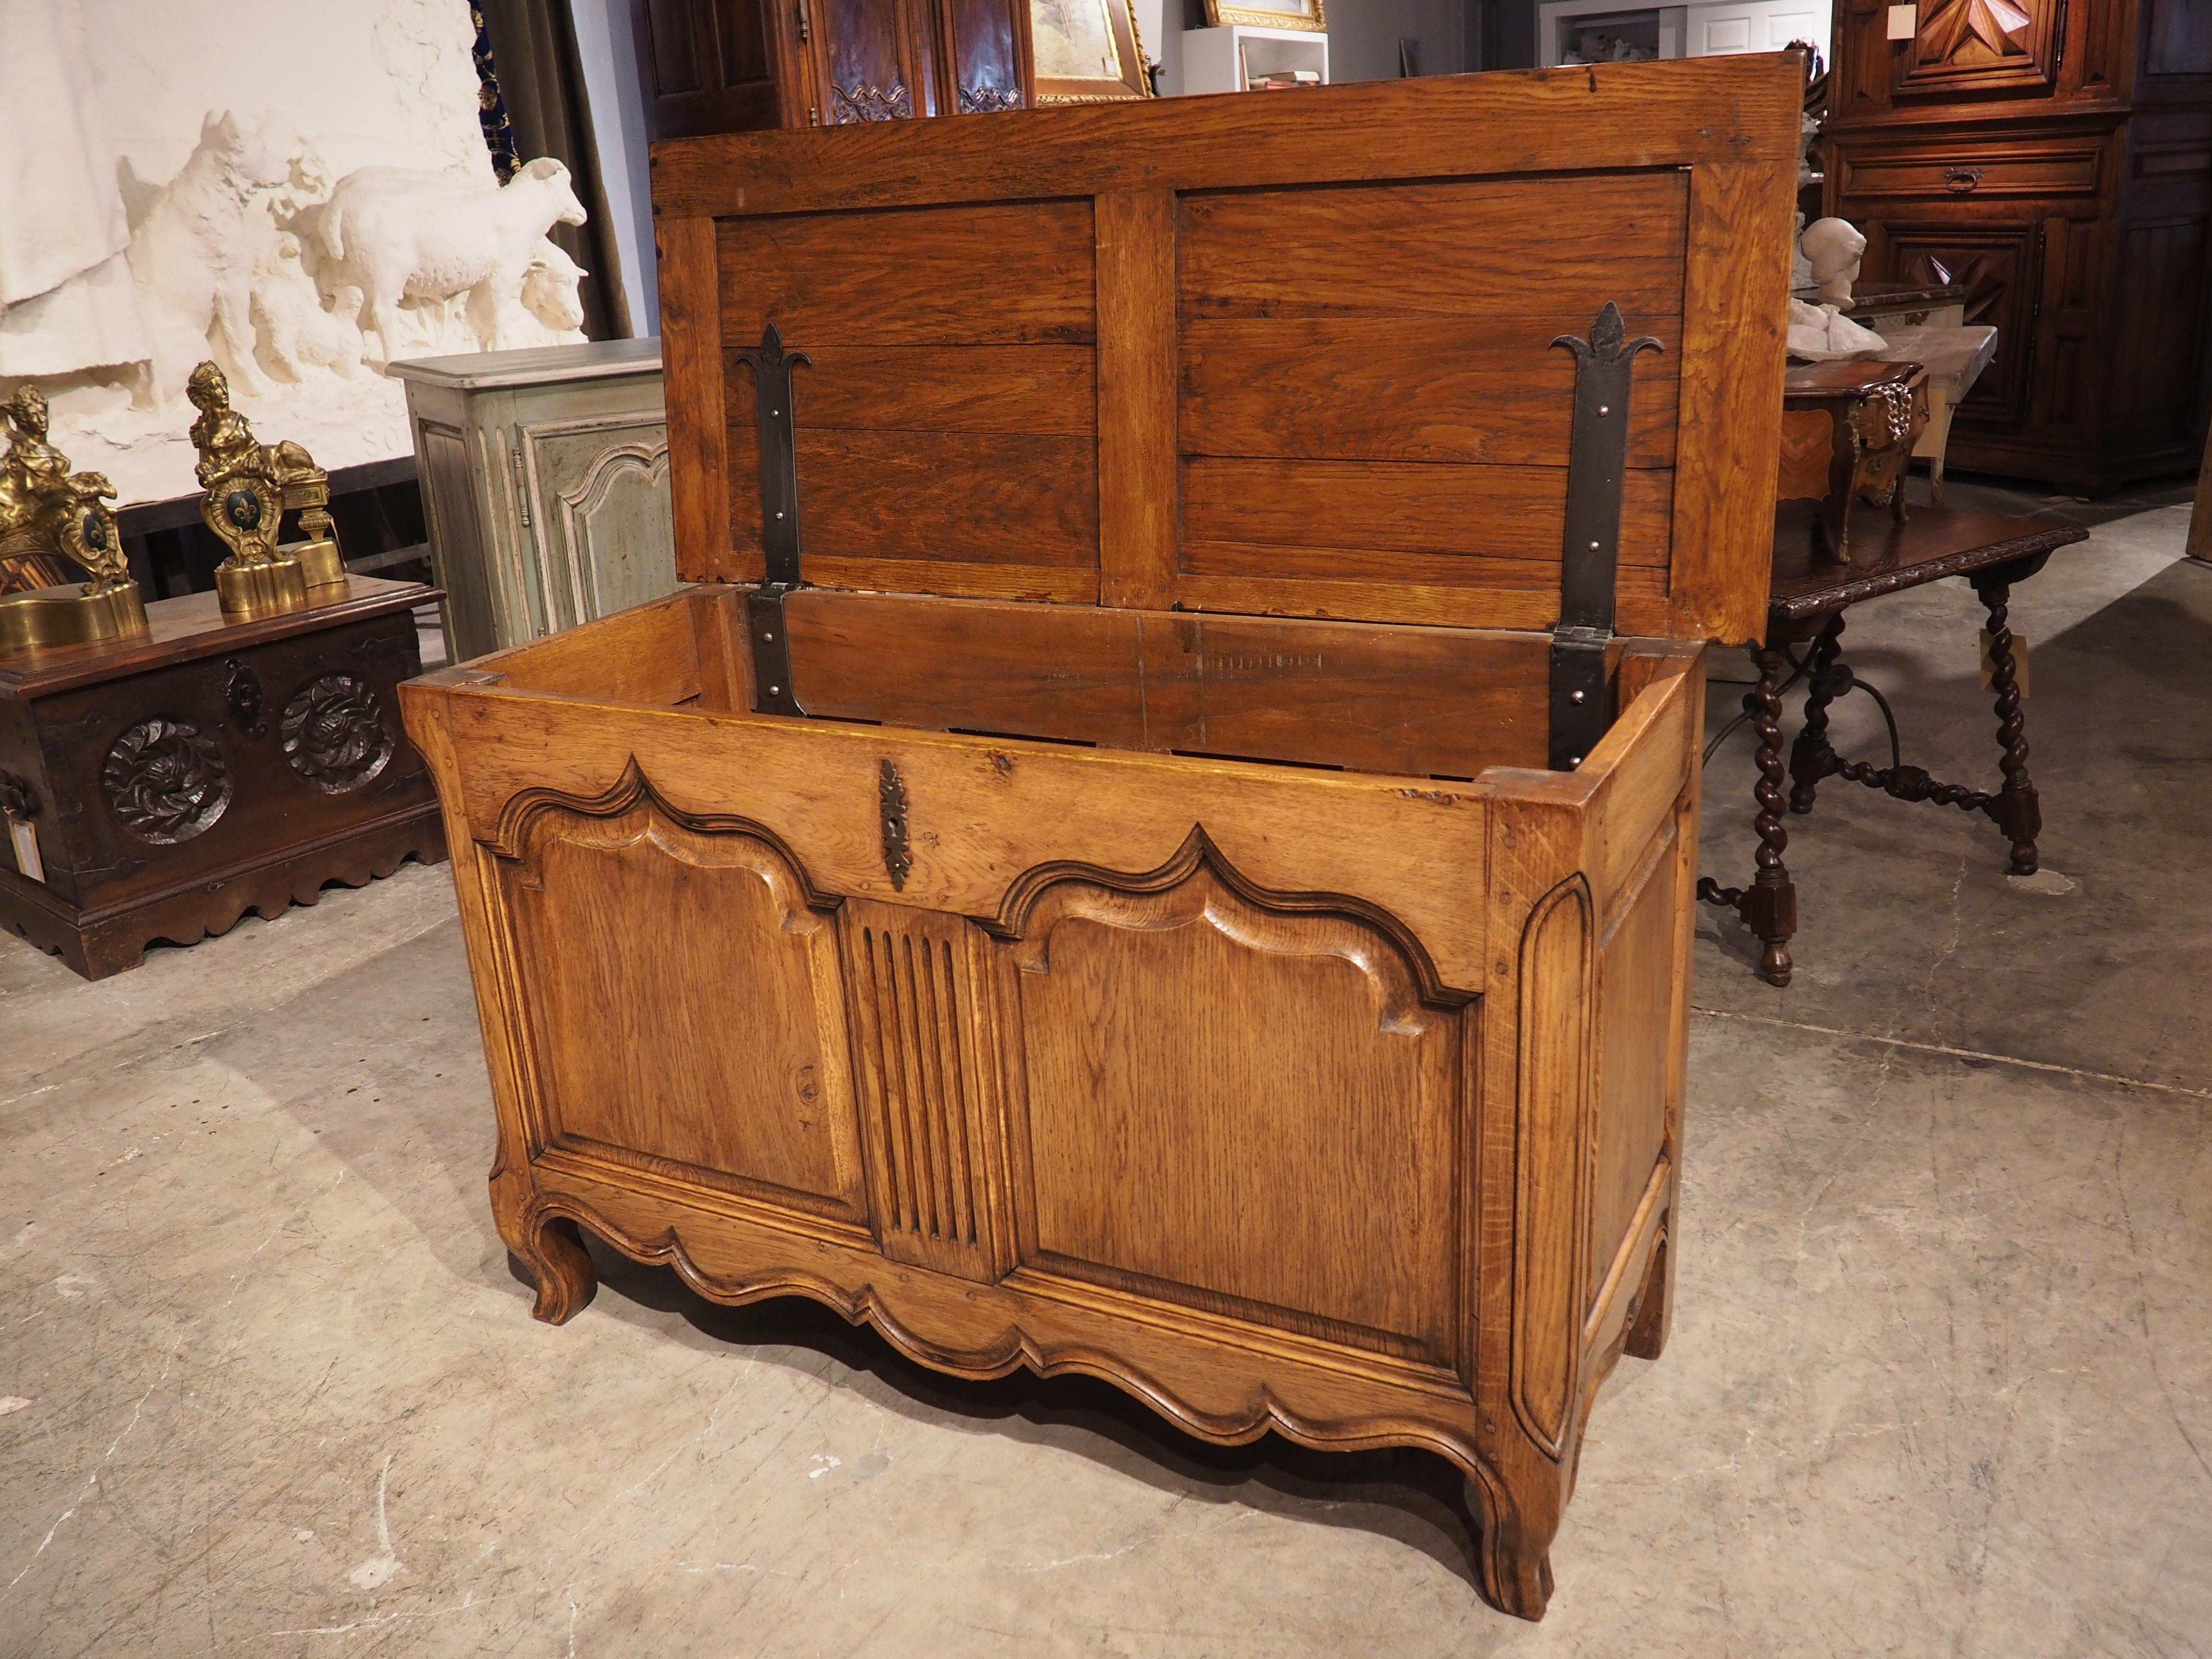 French Carved Oak Coffre Chest or Trunk with Shaped Legs, 20th Century For Sale 6